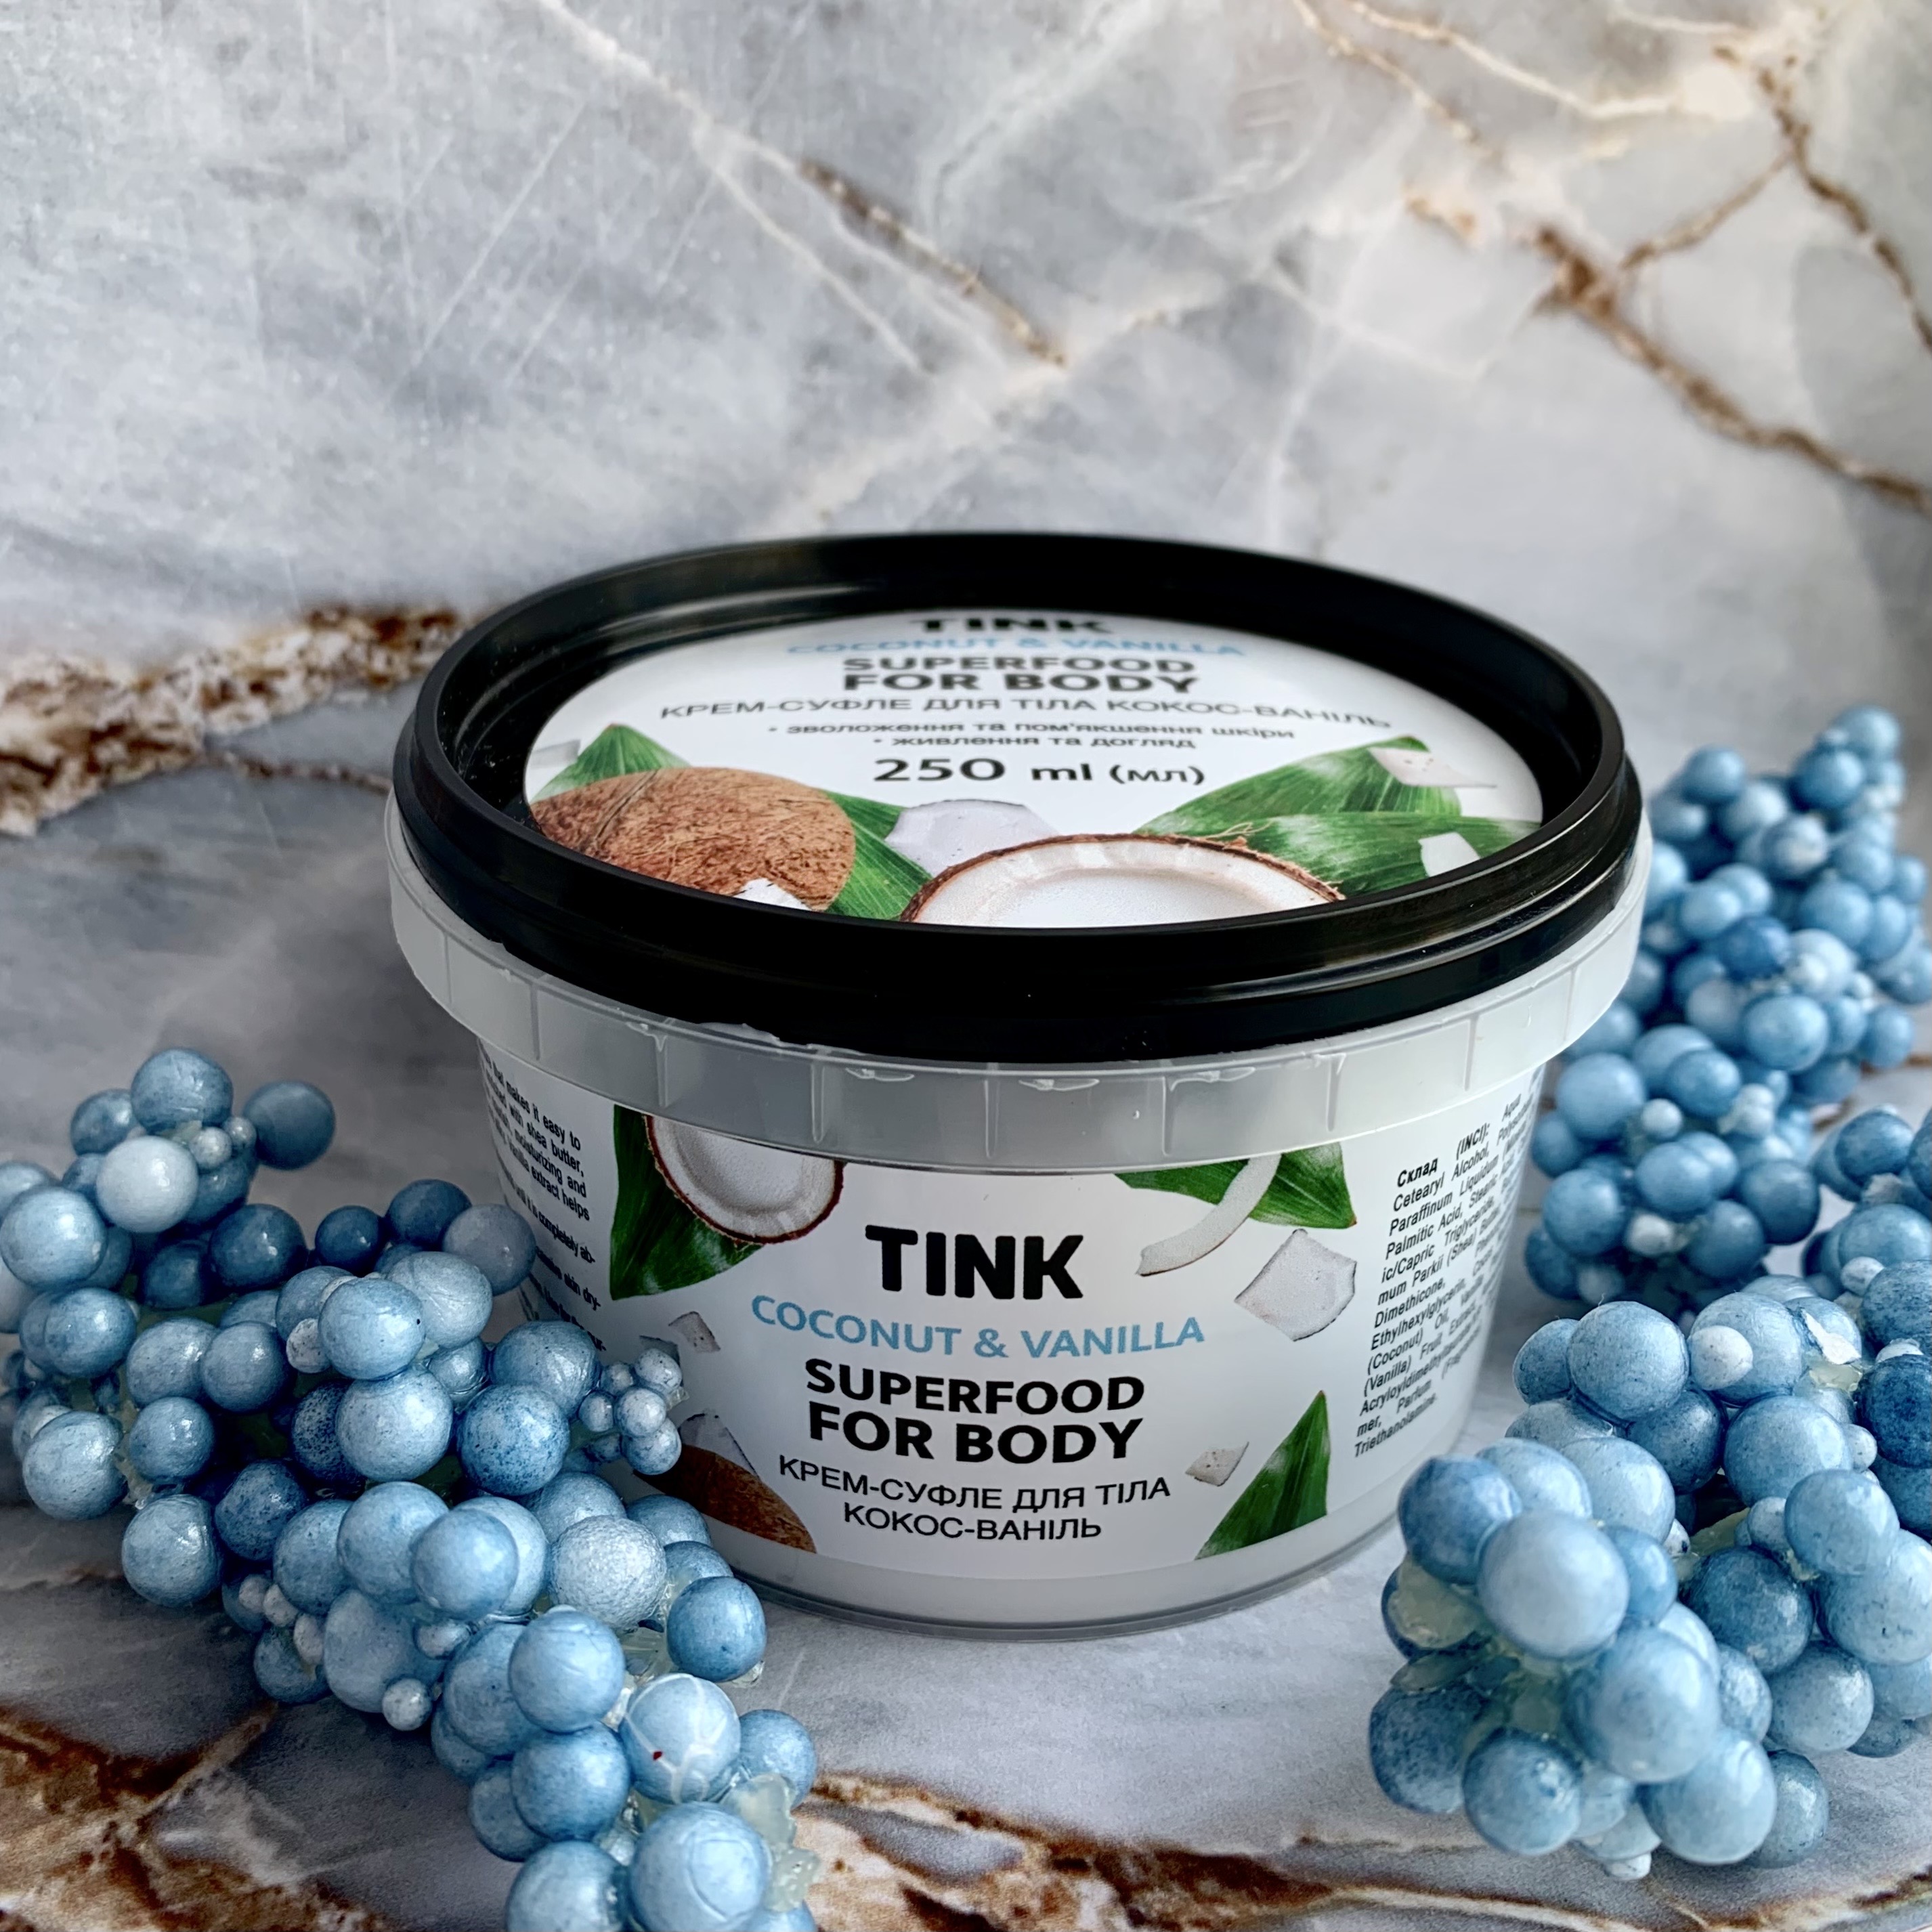 TINK | Coconut & Vanilla Superfood For Body